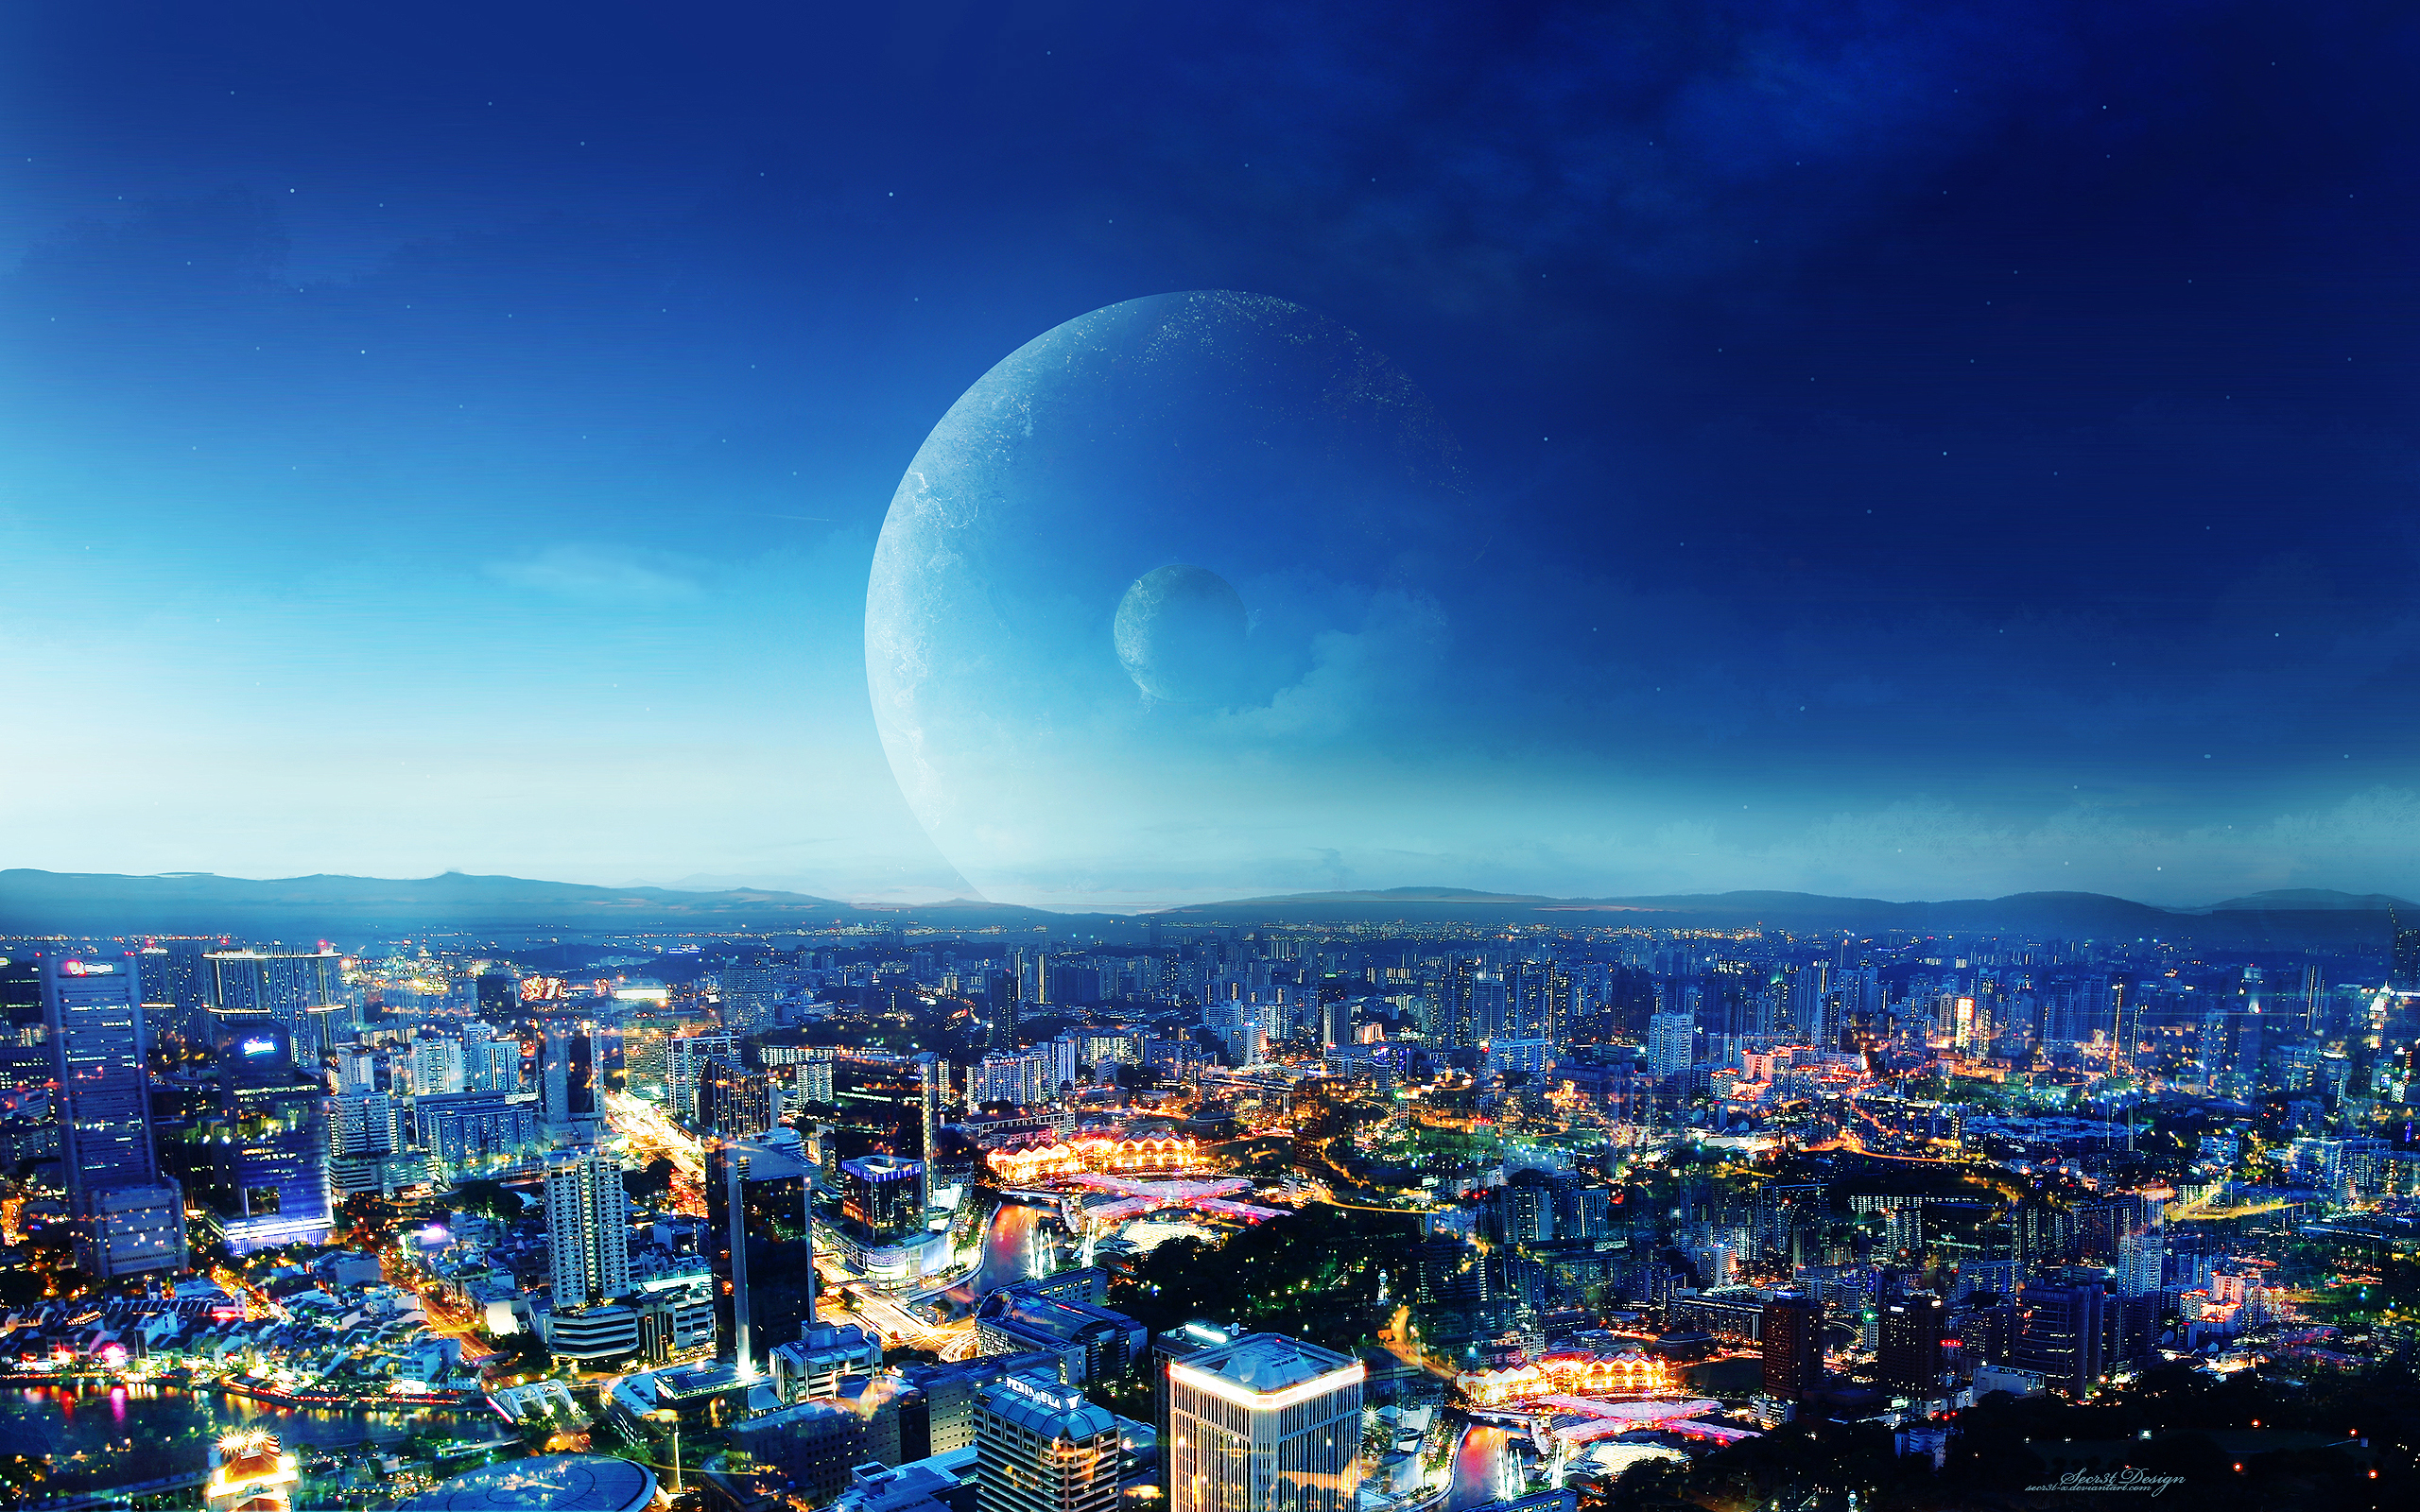 CIty Night Fantasy Wallpapers HD Wallpapers 2560x1600